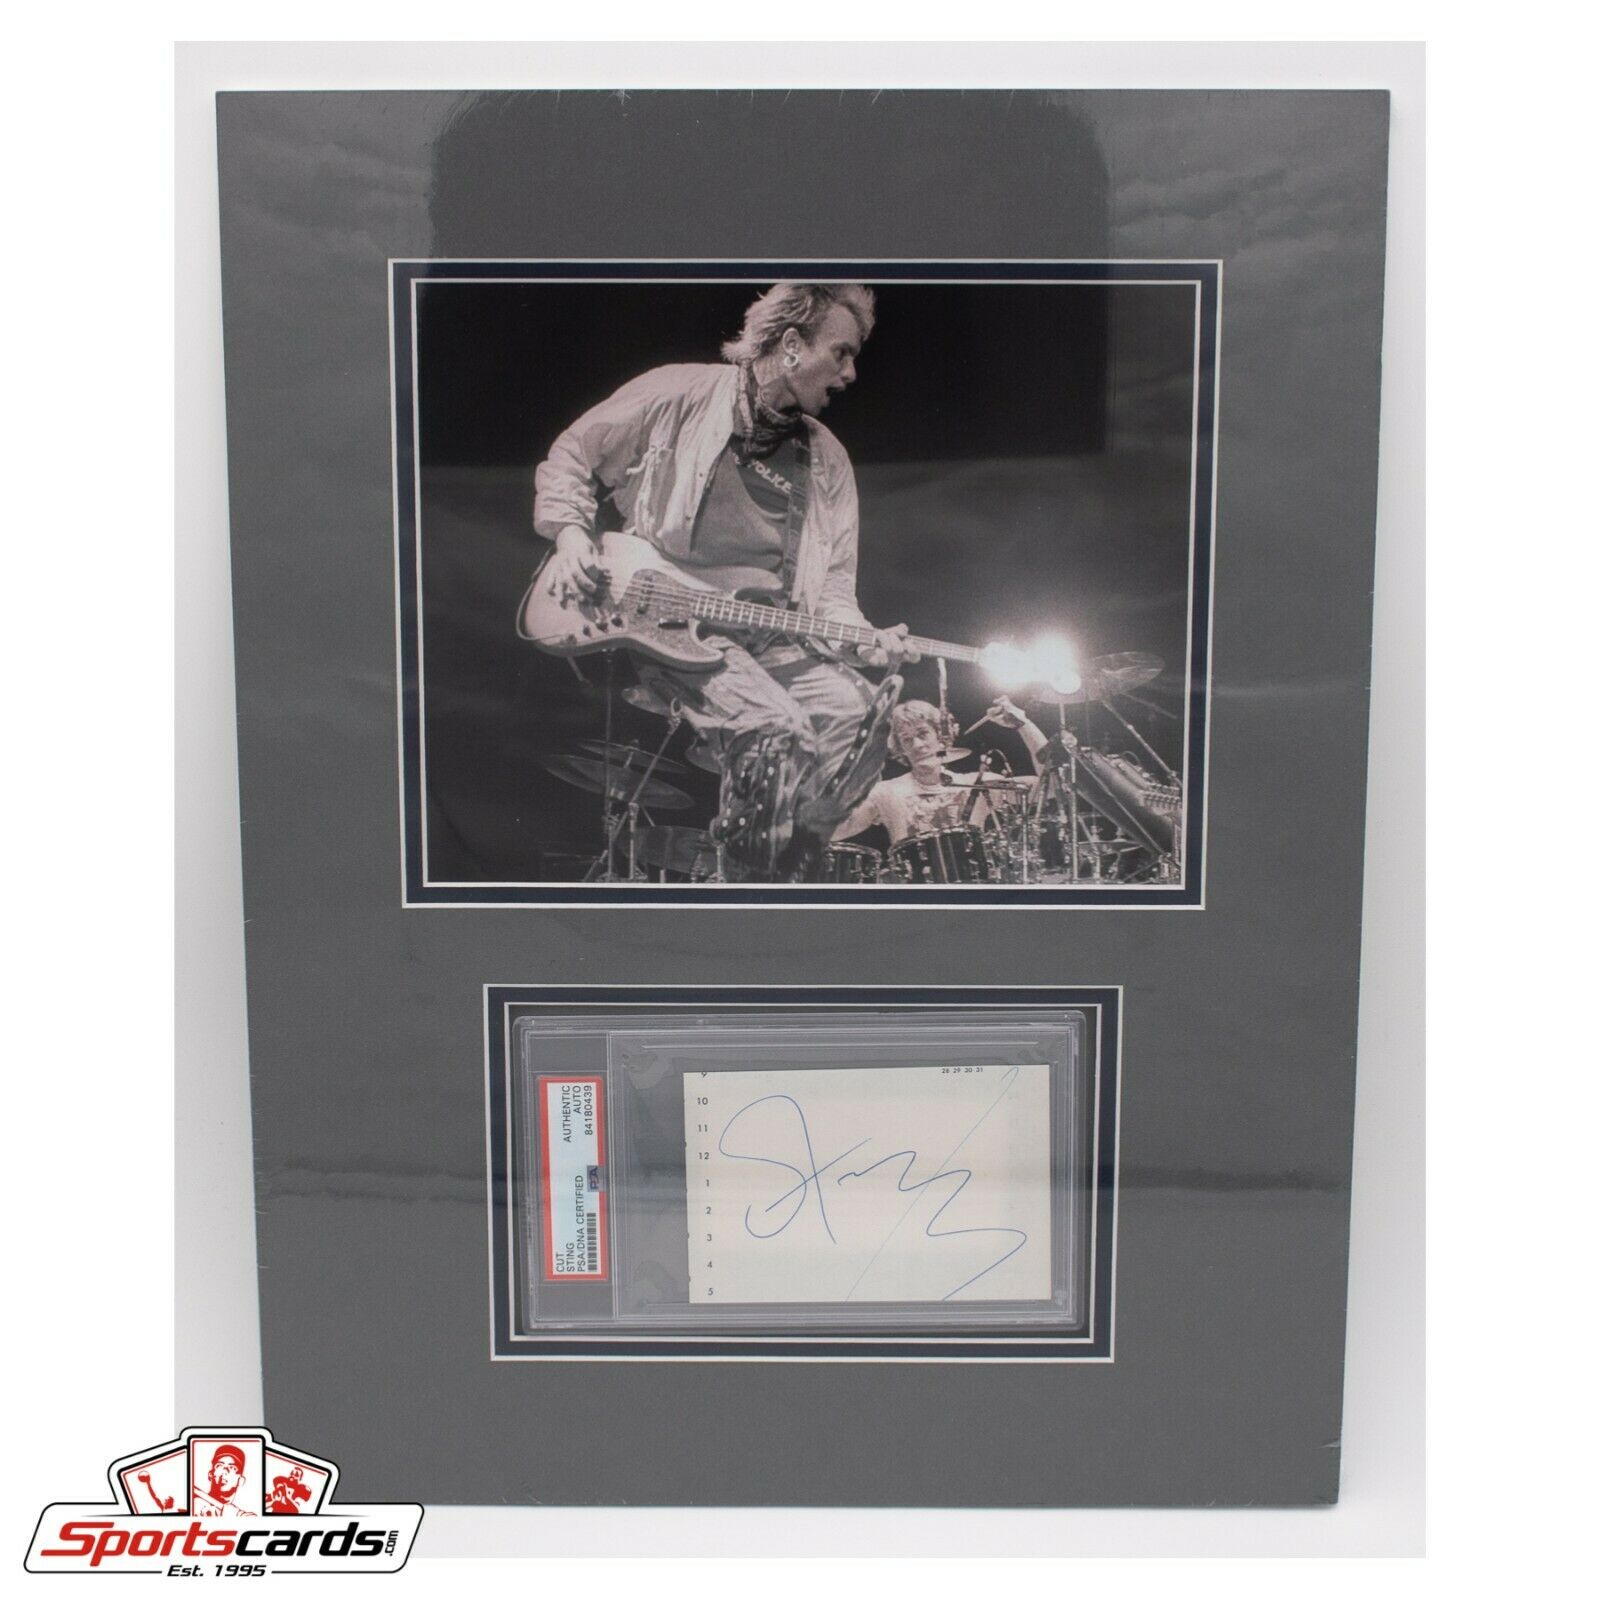 Sting Singer Songwriter PSA/DNA Signed Cut Matted with 8x10 Photo